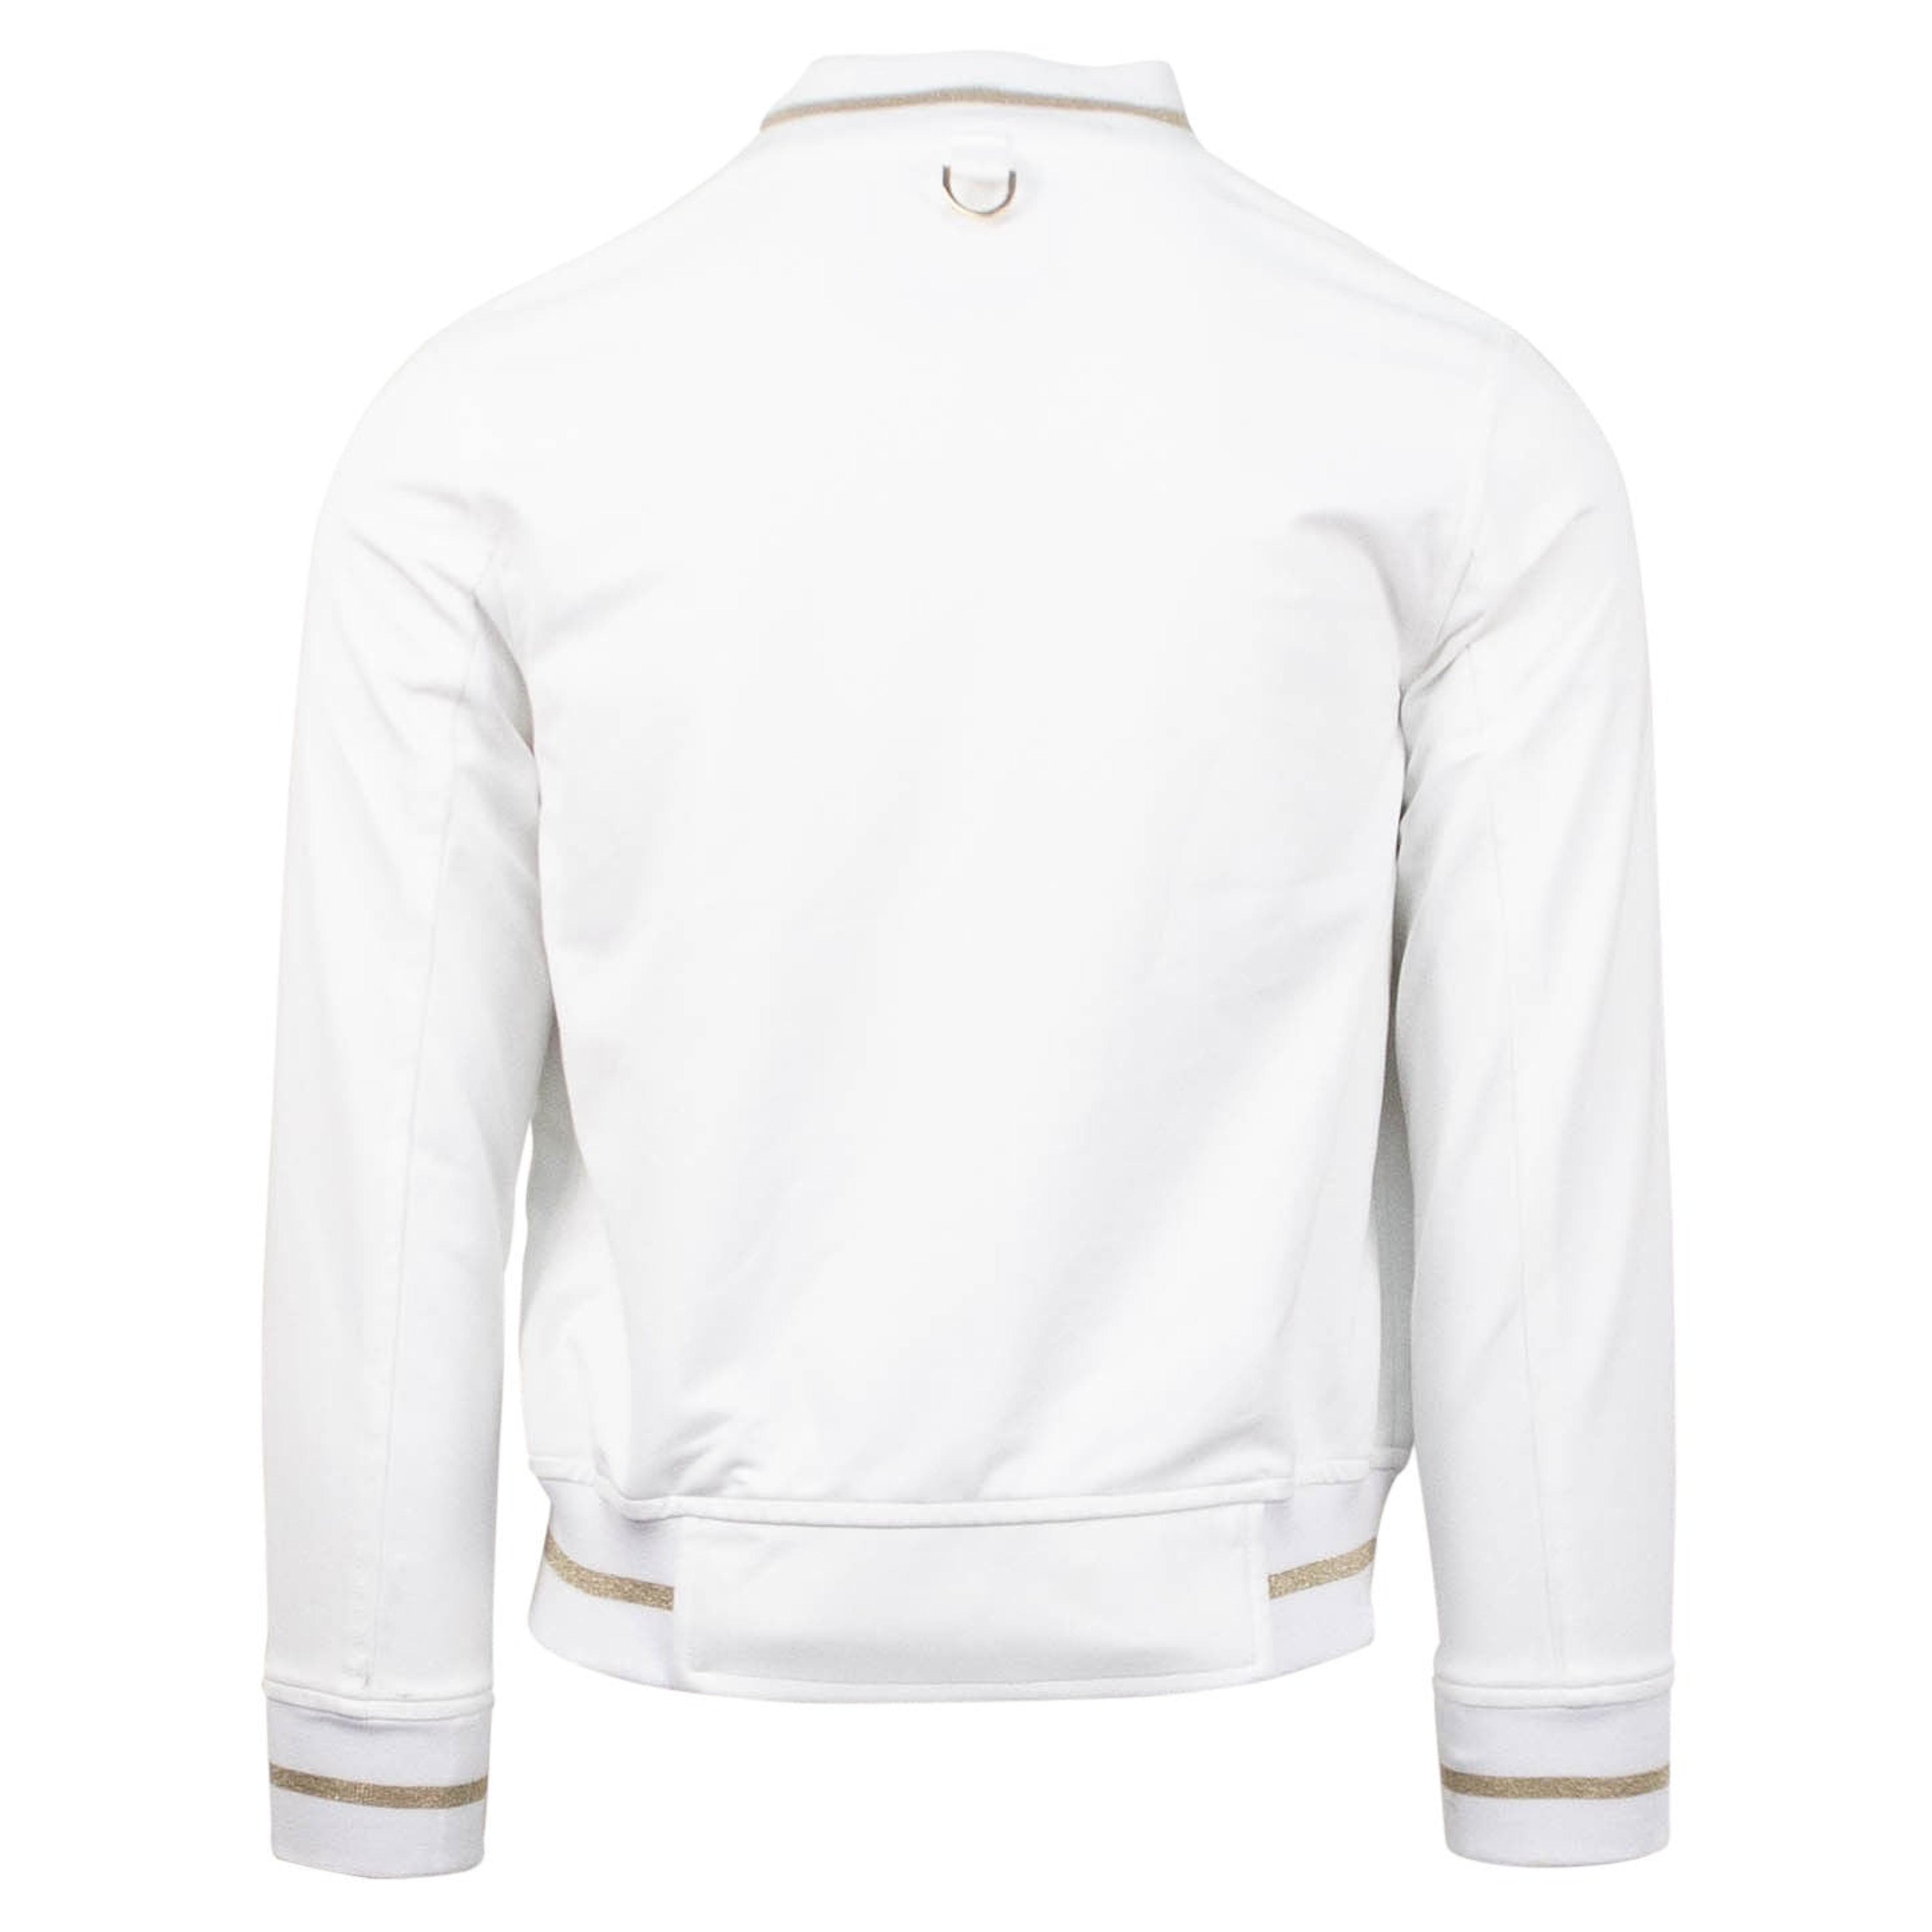 Alternate View 4 of White And Gold 'Mastermind' Blouson Jacket